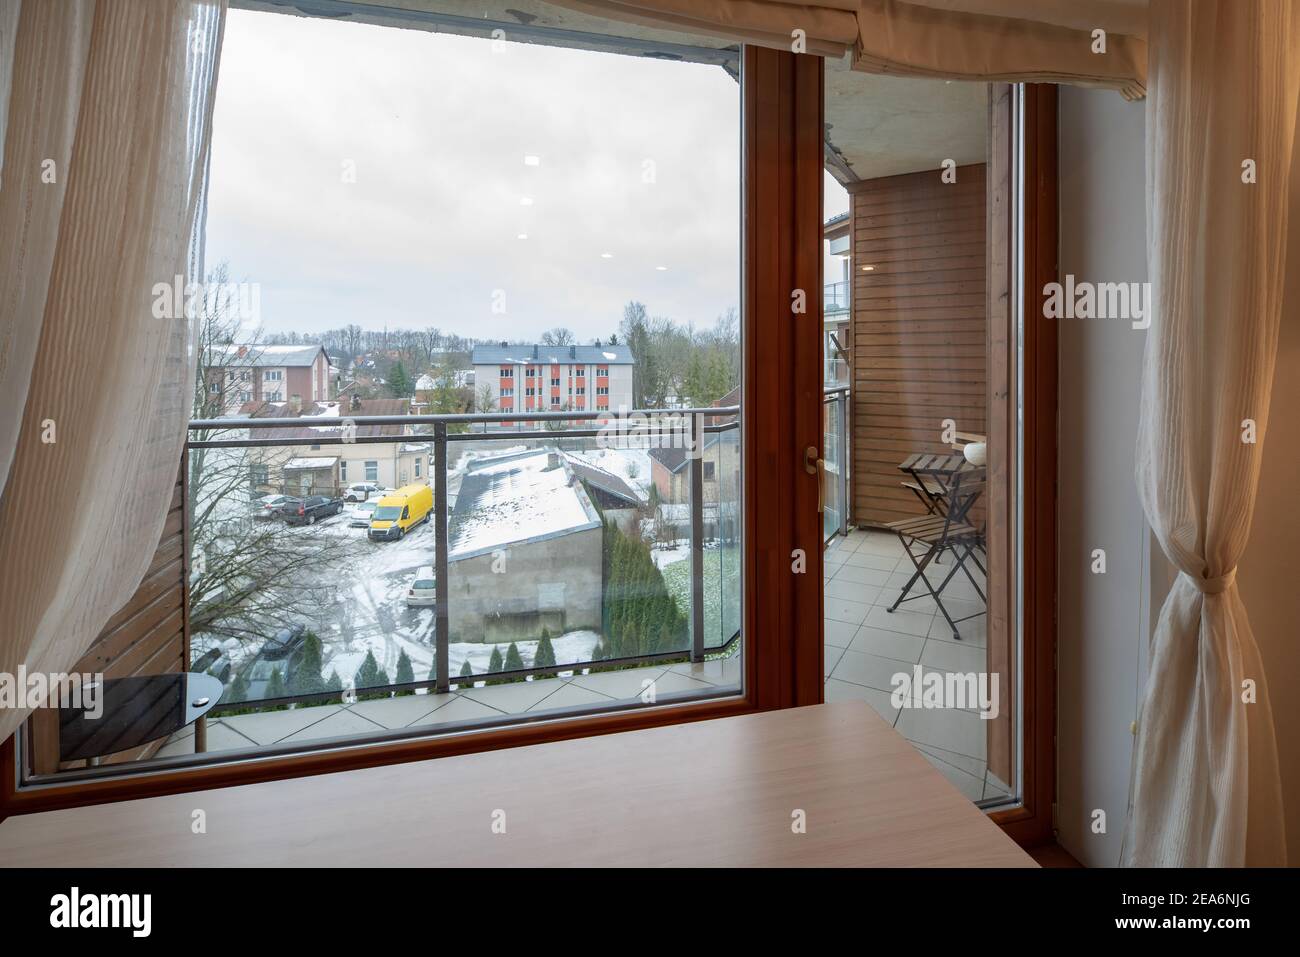 Modern interior of luxury apartment. Window and glass door to balcony. View of city. Stock Photo